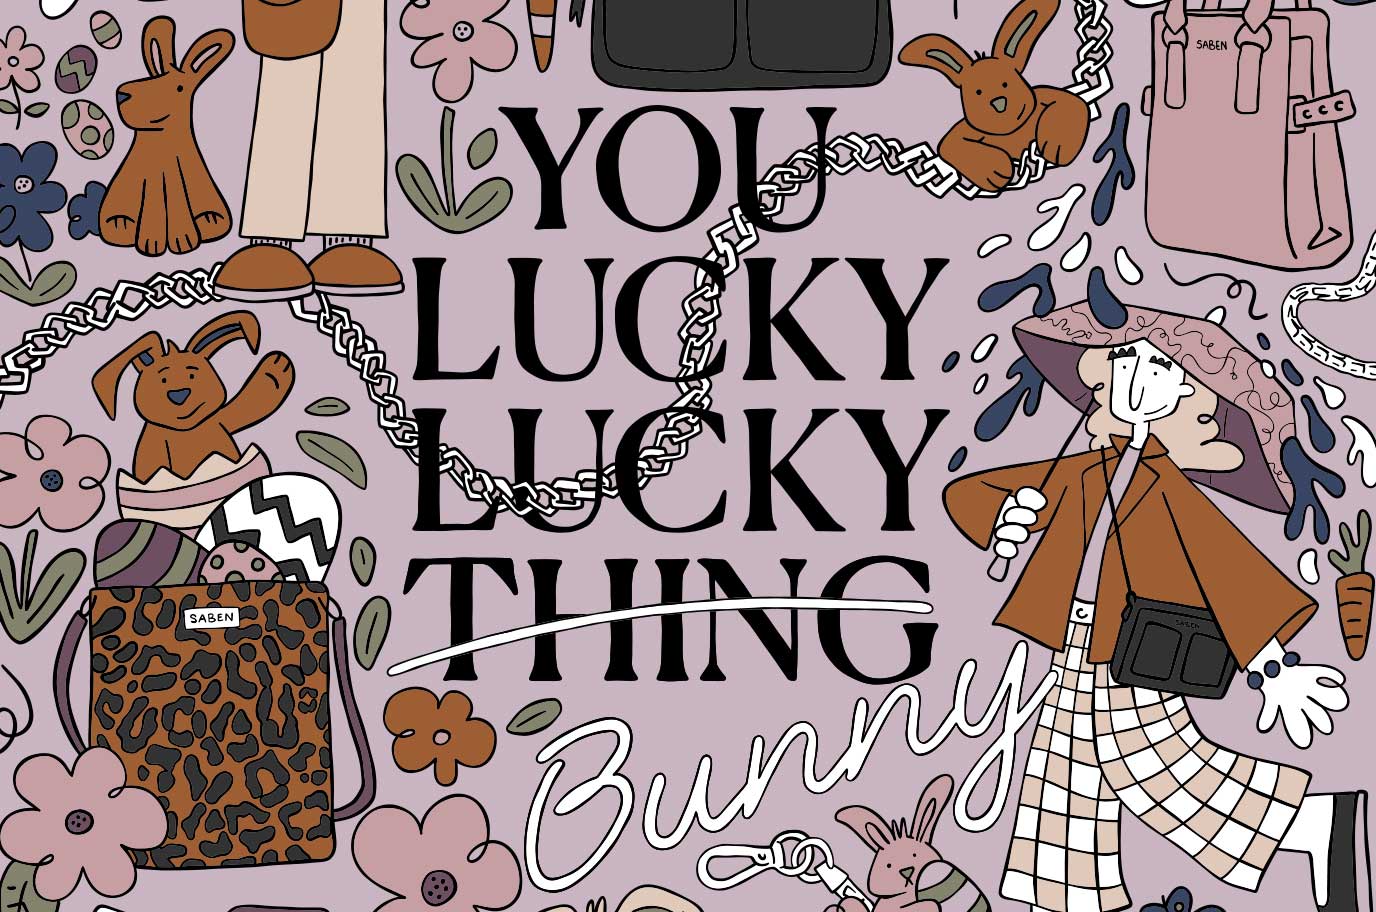 Join The Bunny Hunt | Your chance to win $500